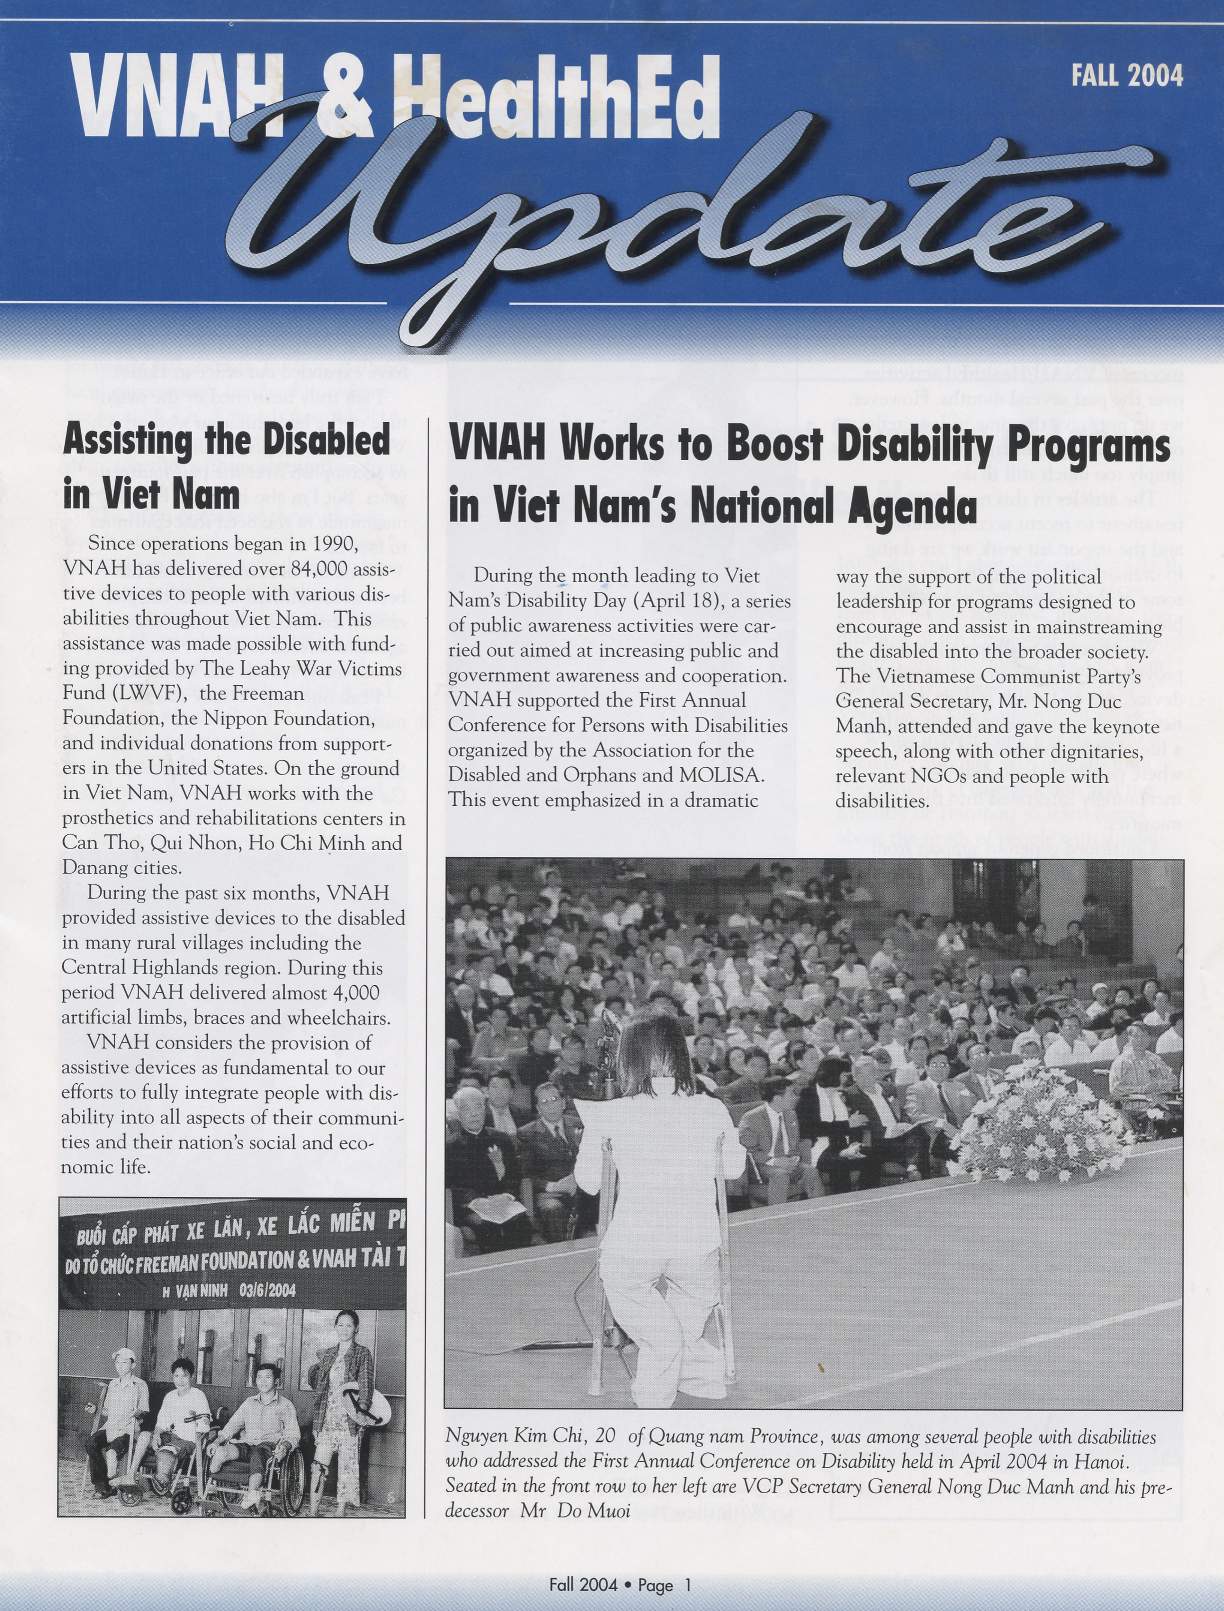 VNAH Works to Boost Disability Programs in Viet Nam's National Agenda Part 1